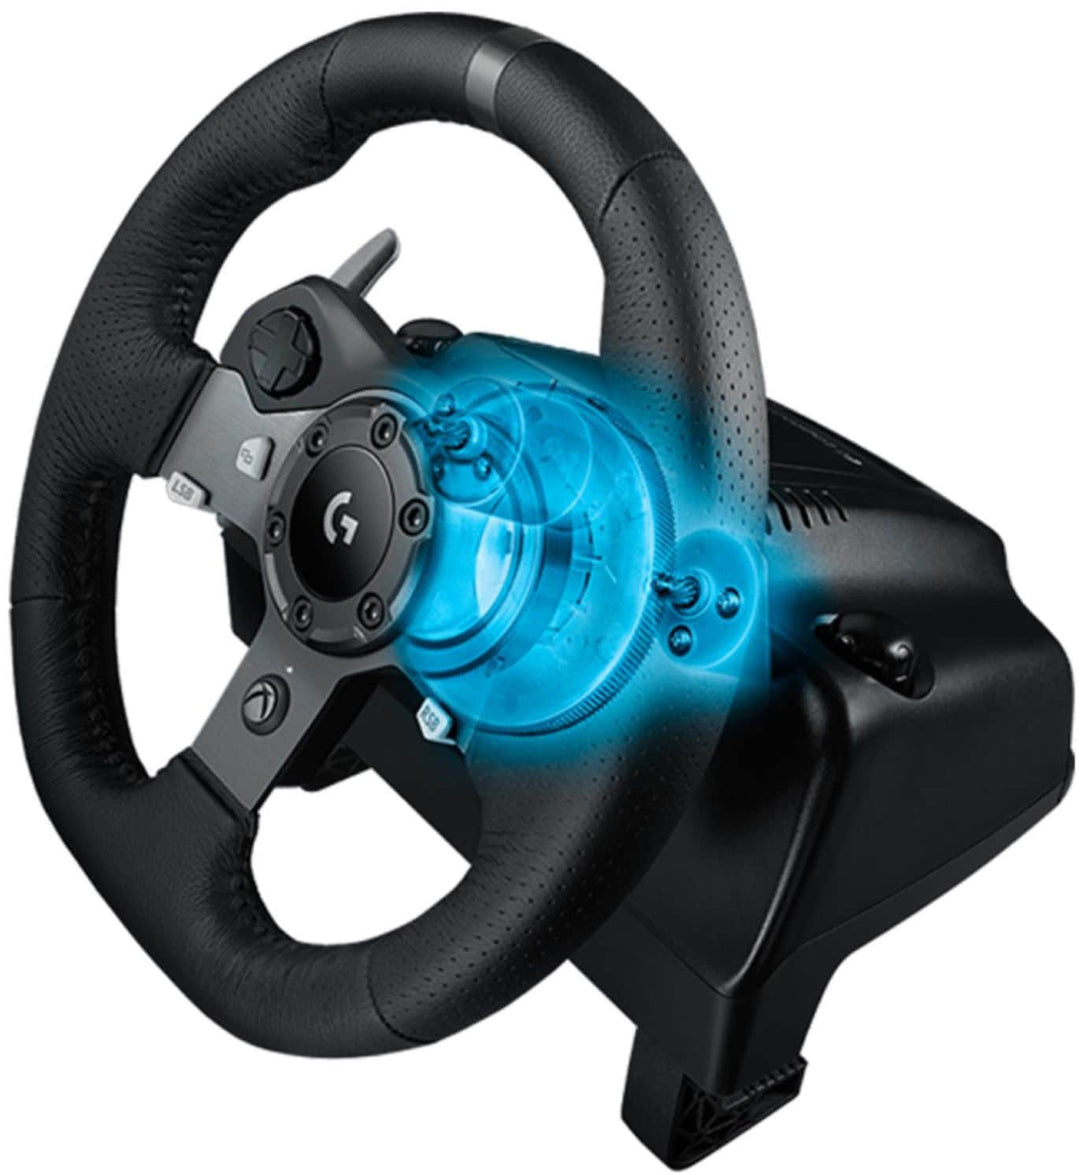 Logitech - G920 Driving Force Racing Wheel and pedals for Xbox Series X|S, Xbox One, PC - Black_7